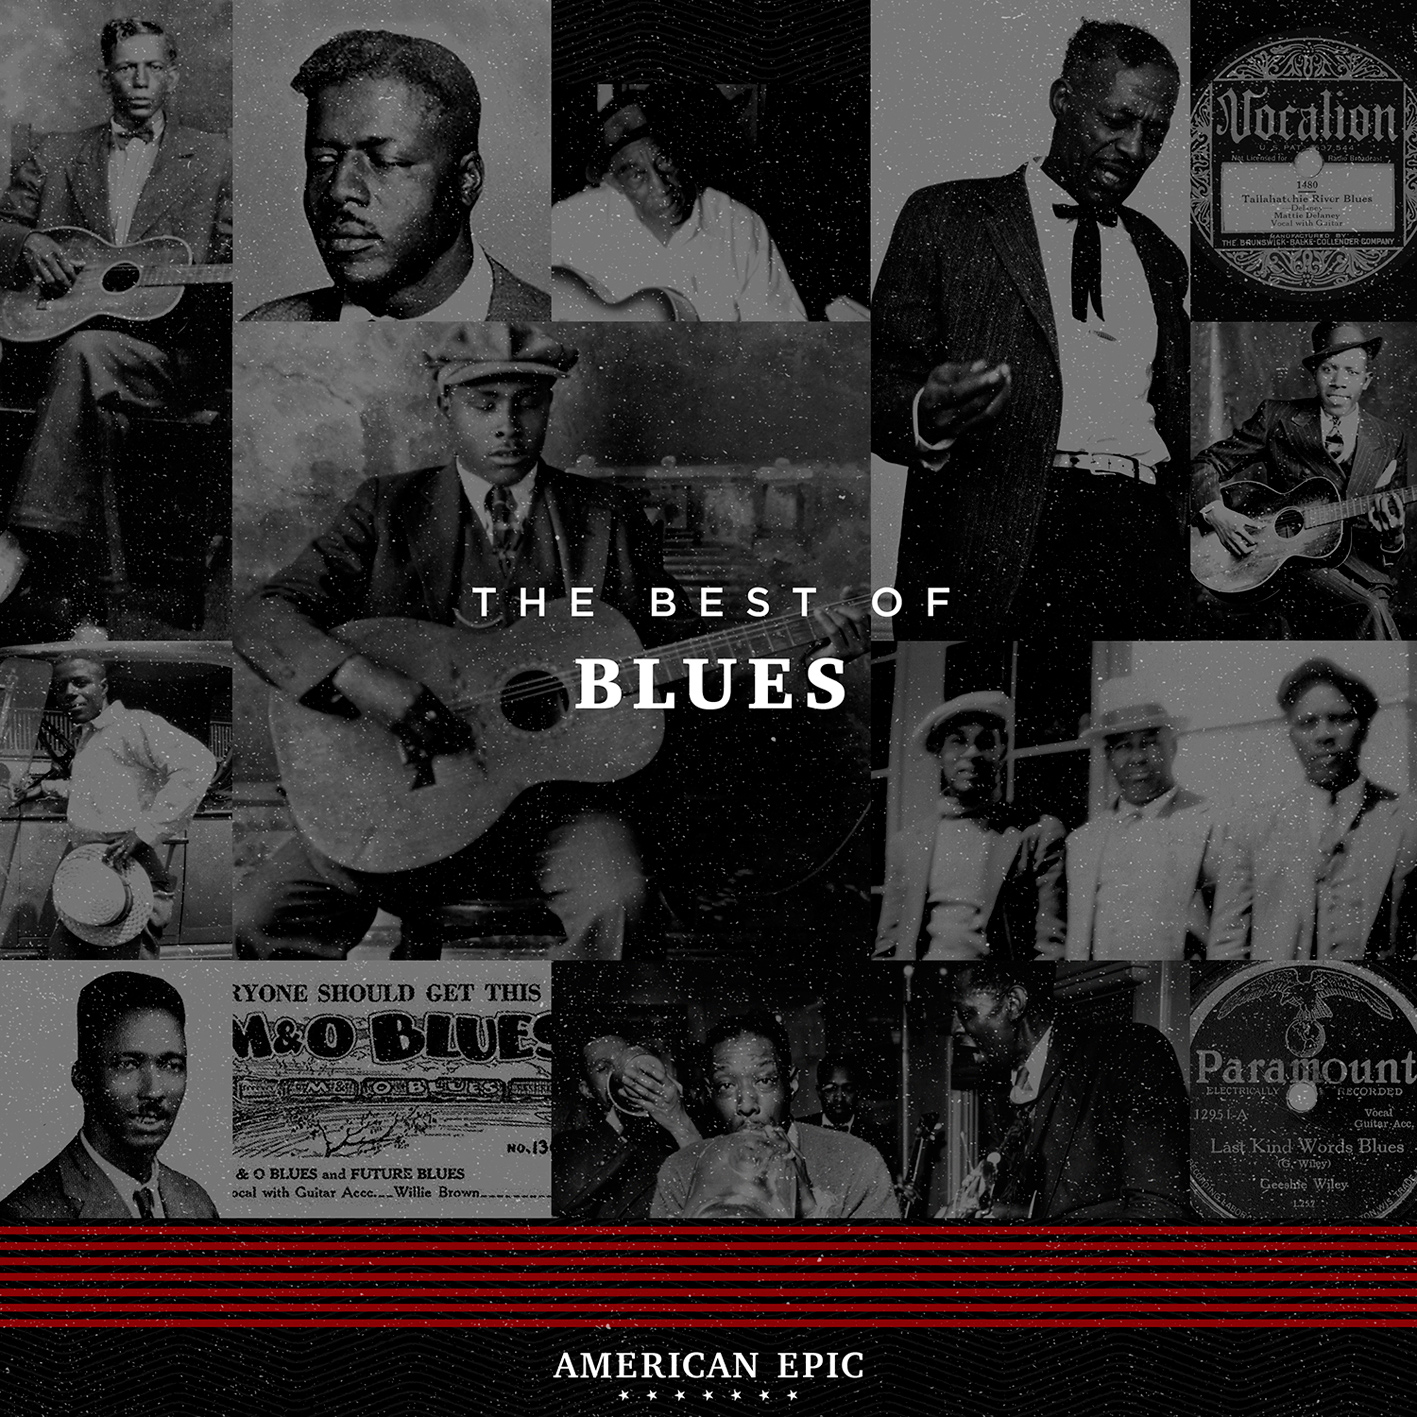 Various Artists - American Epic: The Best Of Blues (2017) [HDTracks FLAC 24bit/96kHz]